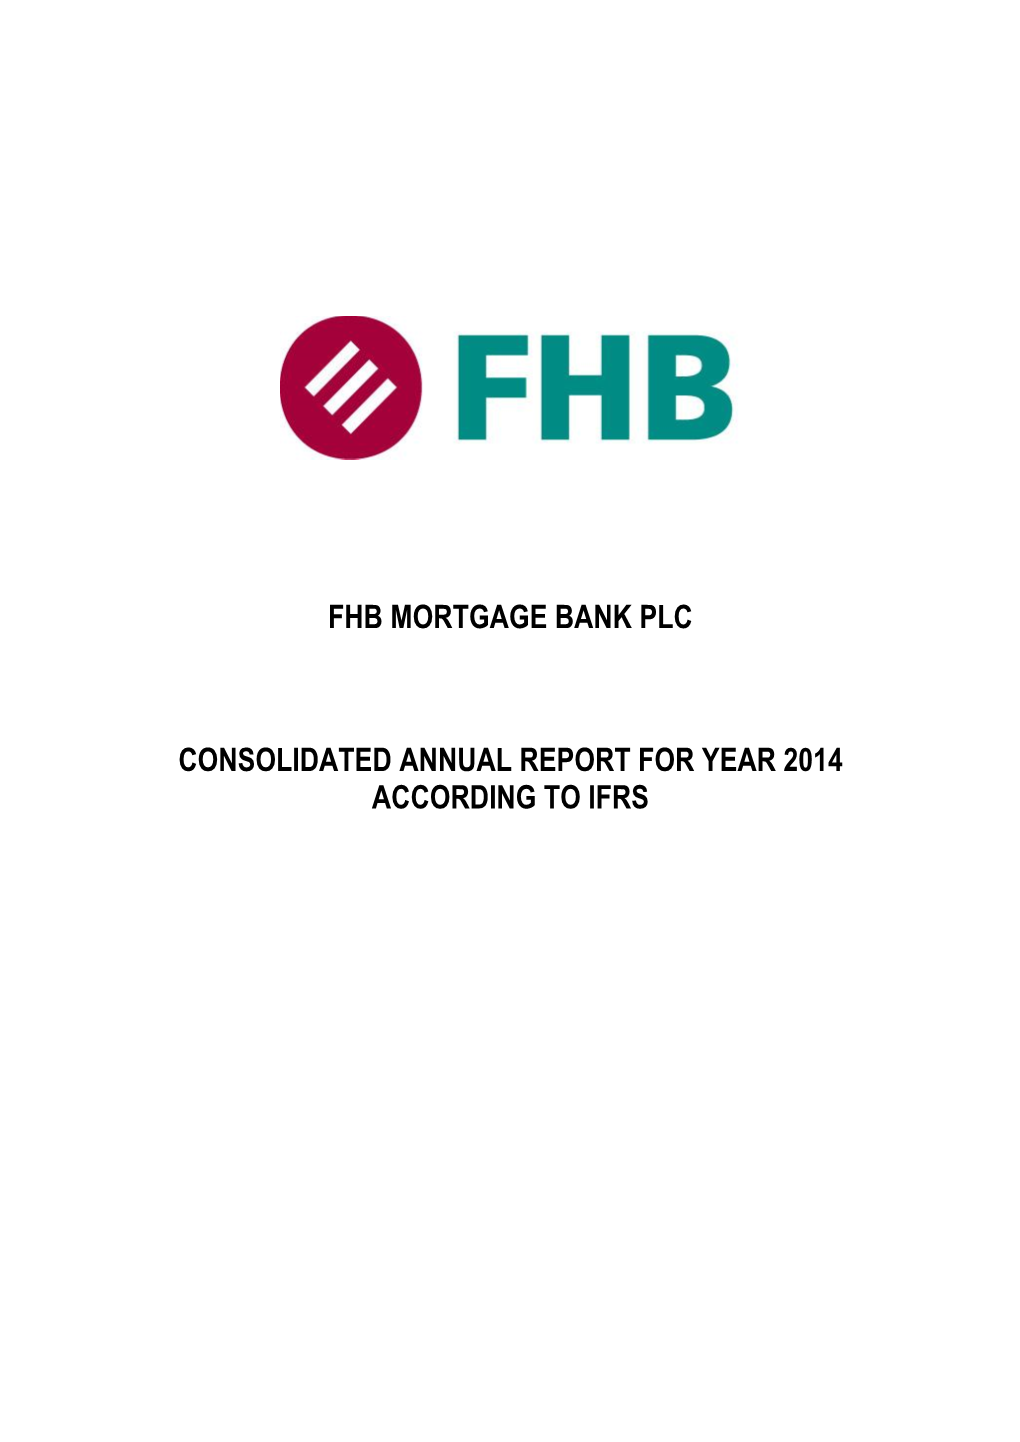 Fhb Mortgage Bank Plc Consolidated Annual Report for Year 2014 According to Ifrs